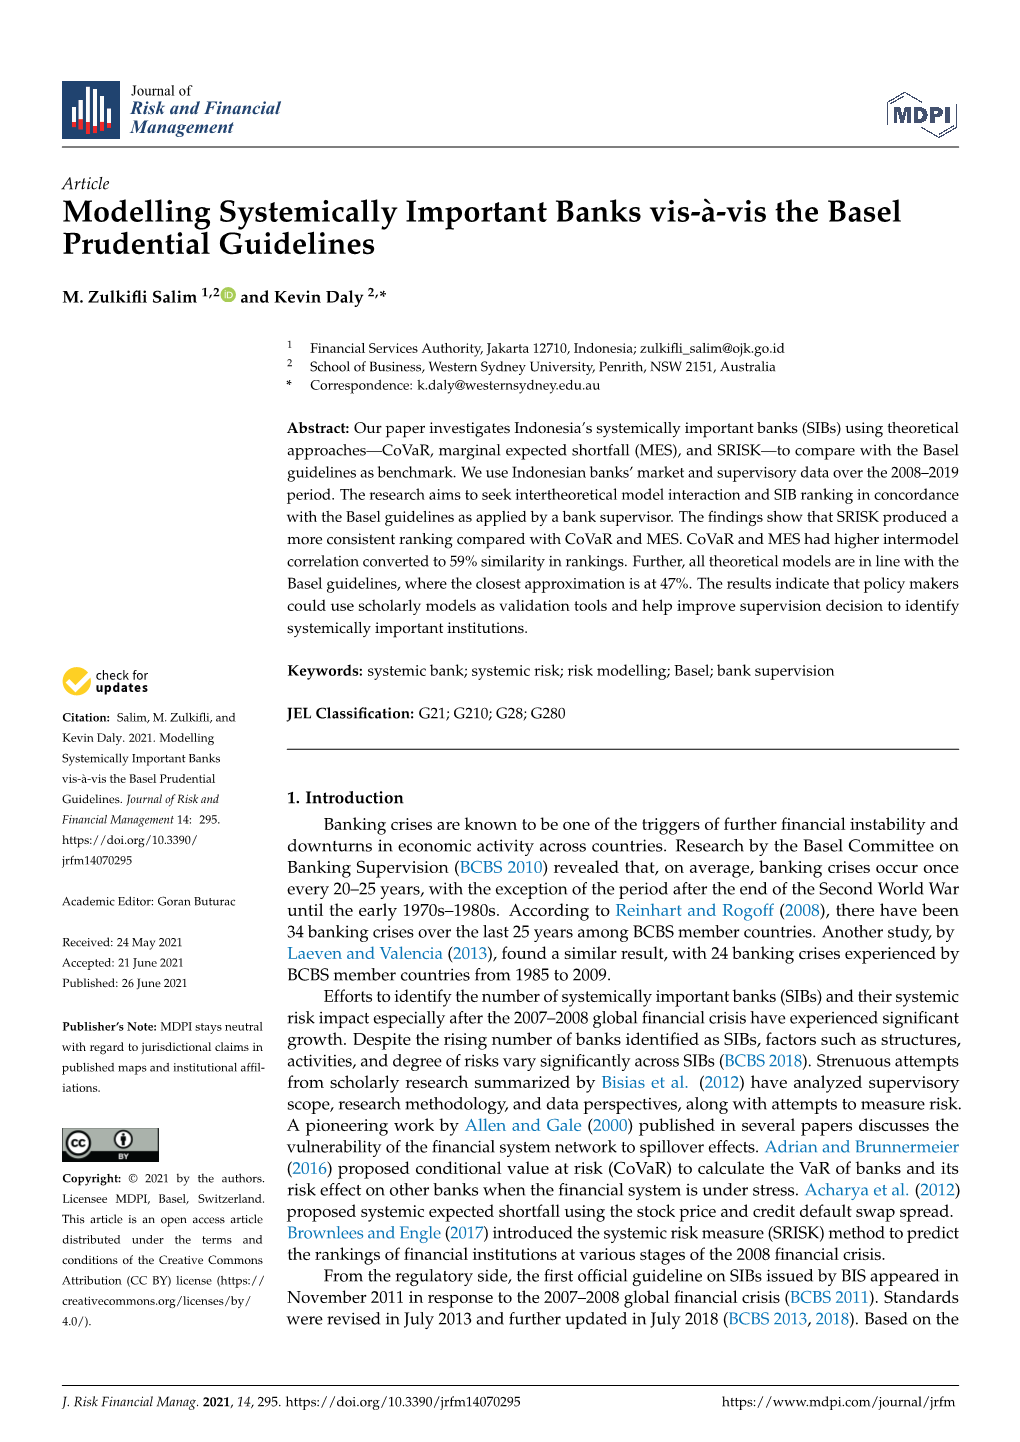 Modelling Systemically Important Banks Vis-À-Vis the Basel Prudential Guidelines